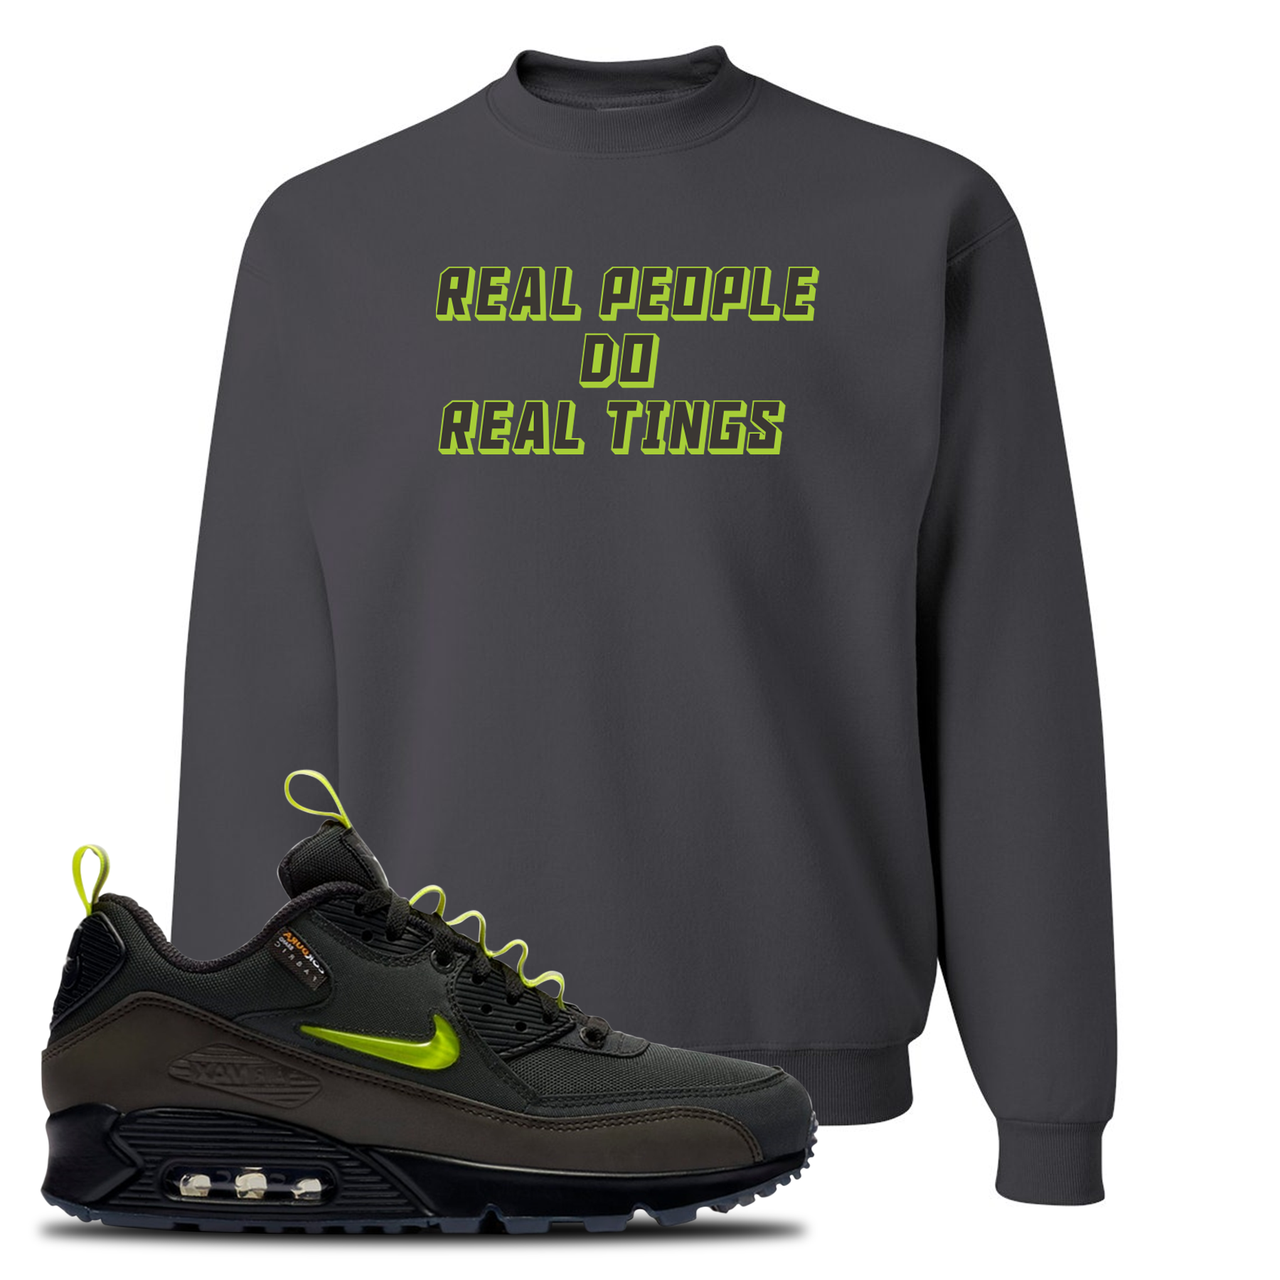 The Basement X Air Max 90 Manchester Real People Do Real Things Charcoal Gray Sneaker Hook Up Crewneck Sweatshirt